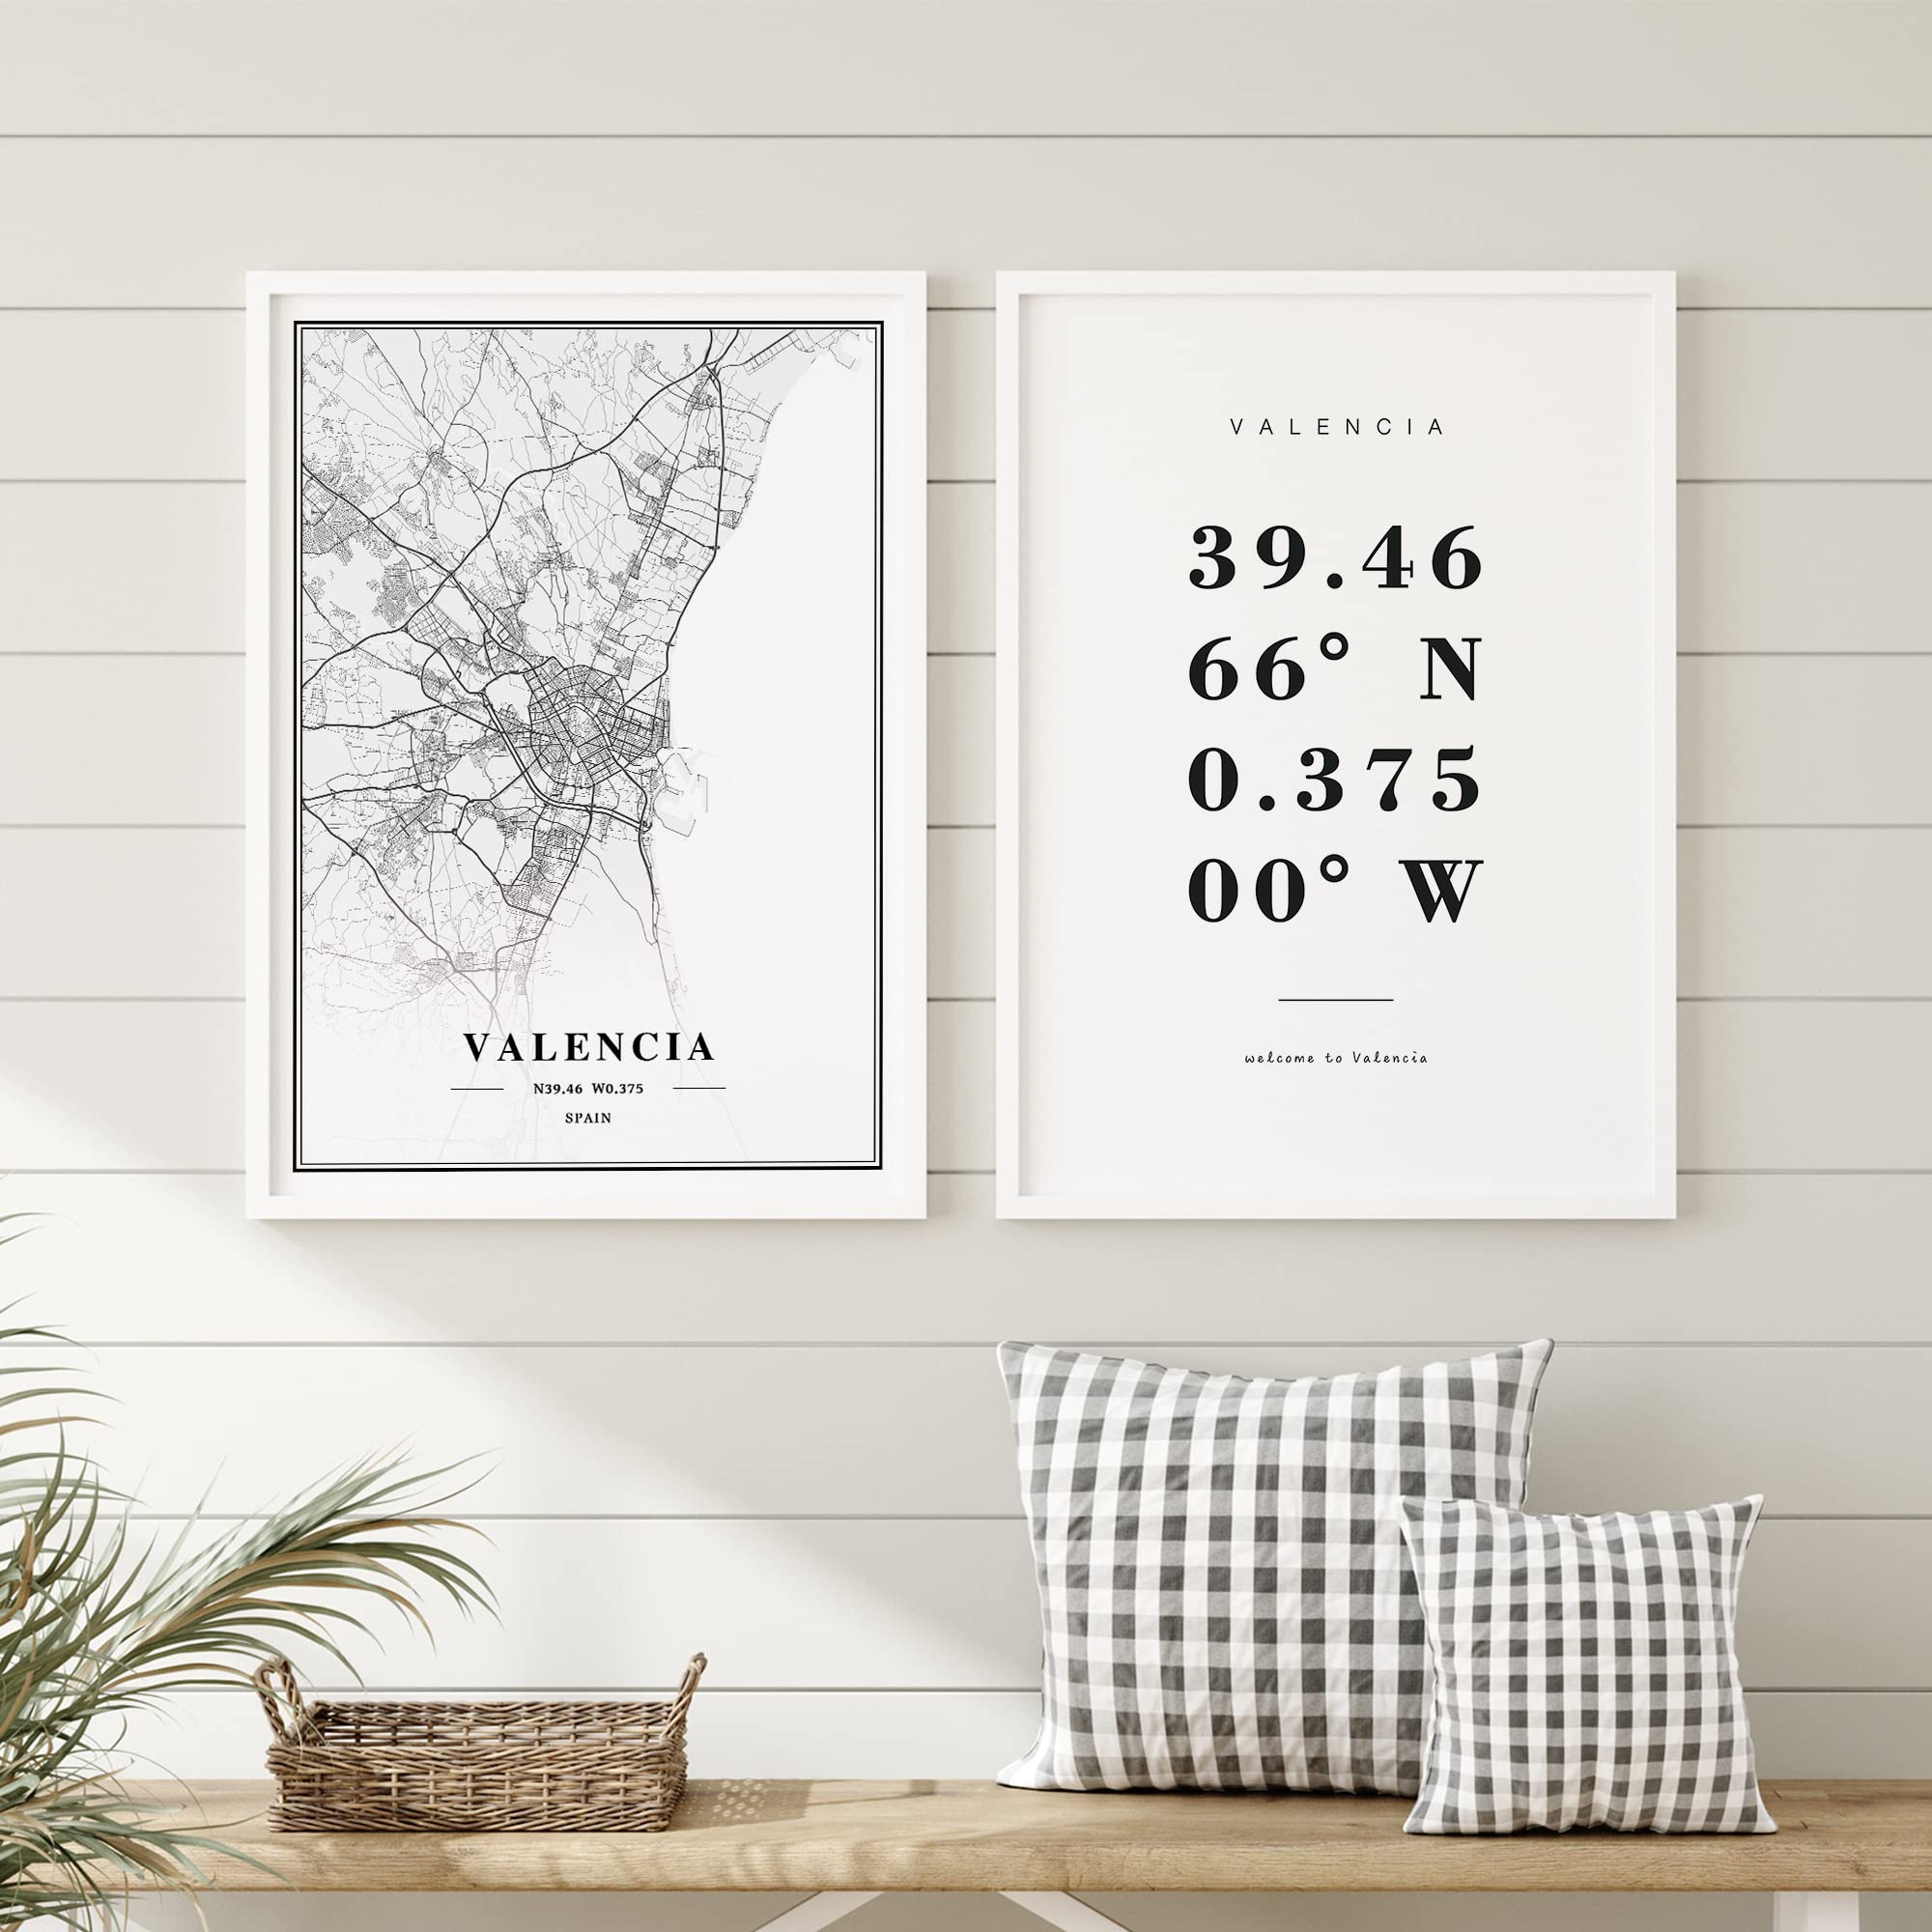 Dear Mapper Valencia Spain View Abstract Road Modern Map Art Minimalist Painting Black and White Canvas Line Art Print Poster Art Print Poster Home Decor (Set of 3 Unframed) (16x24inch)